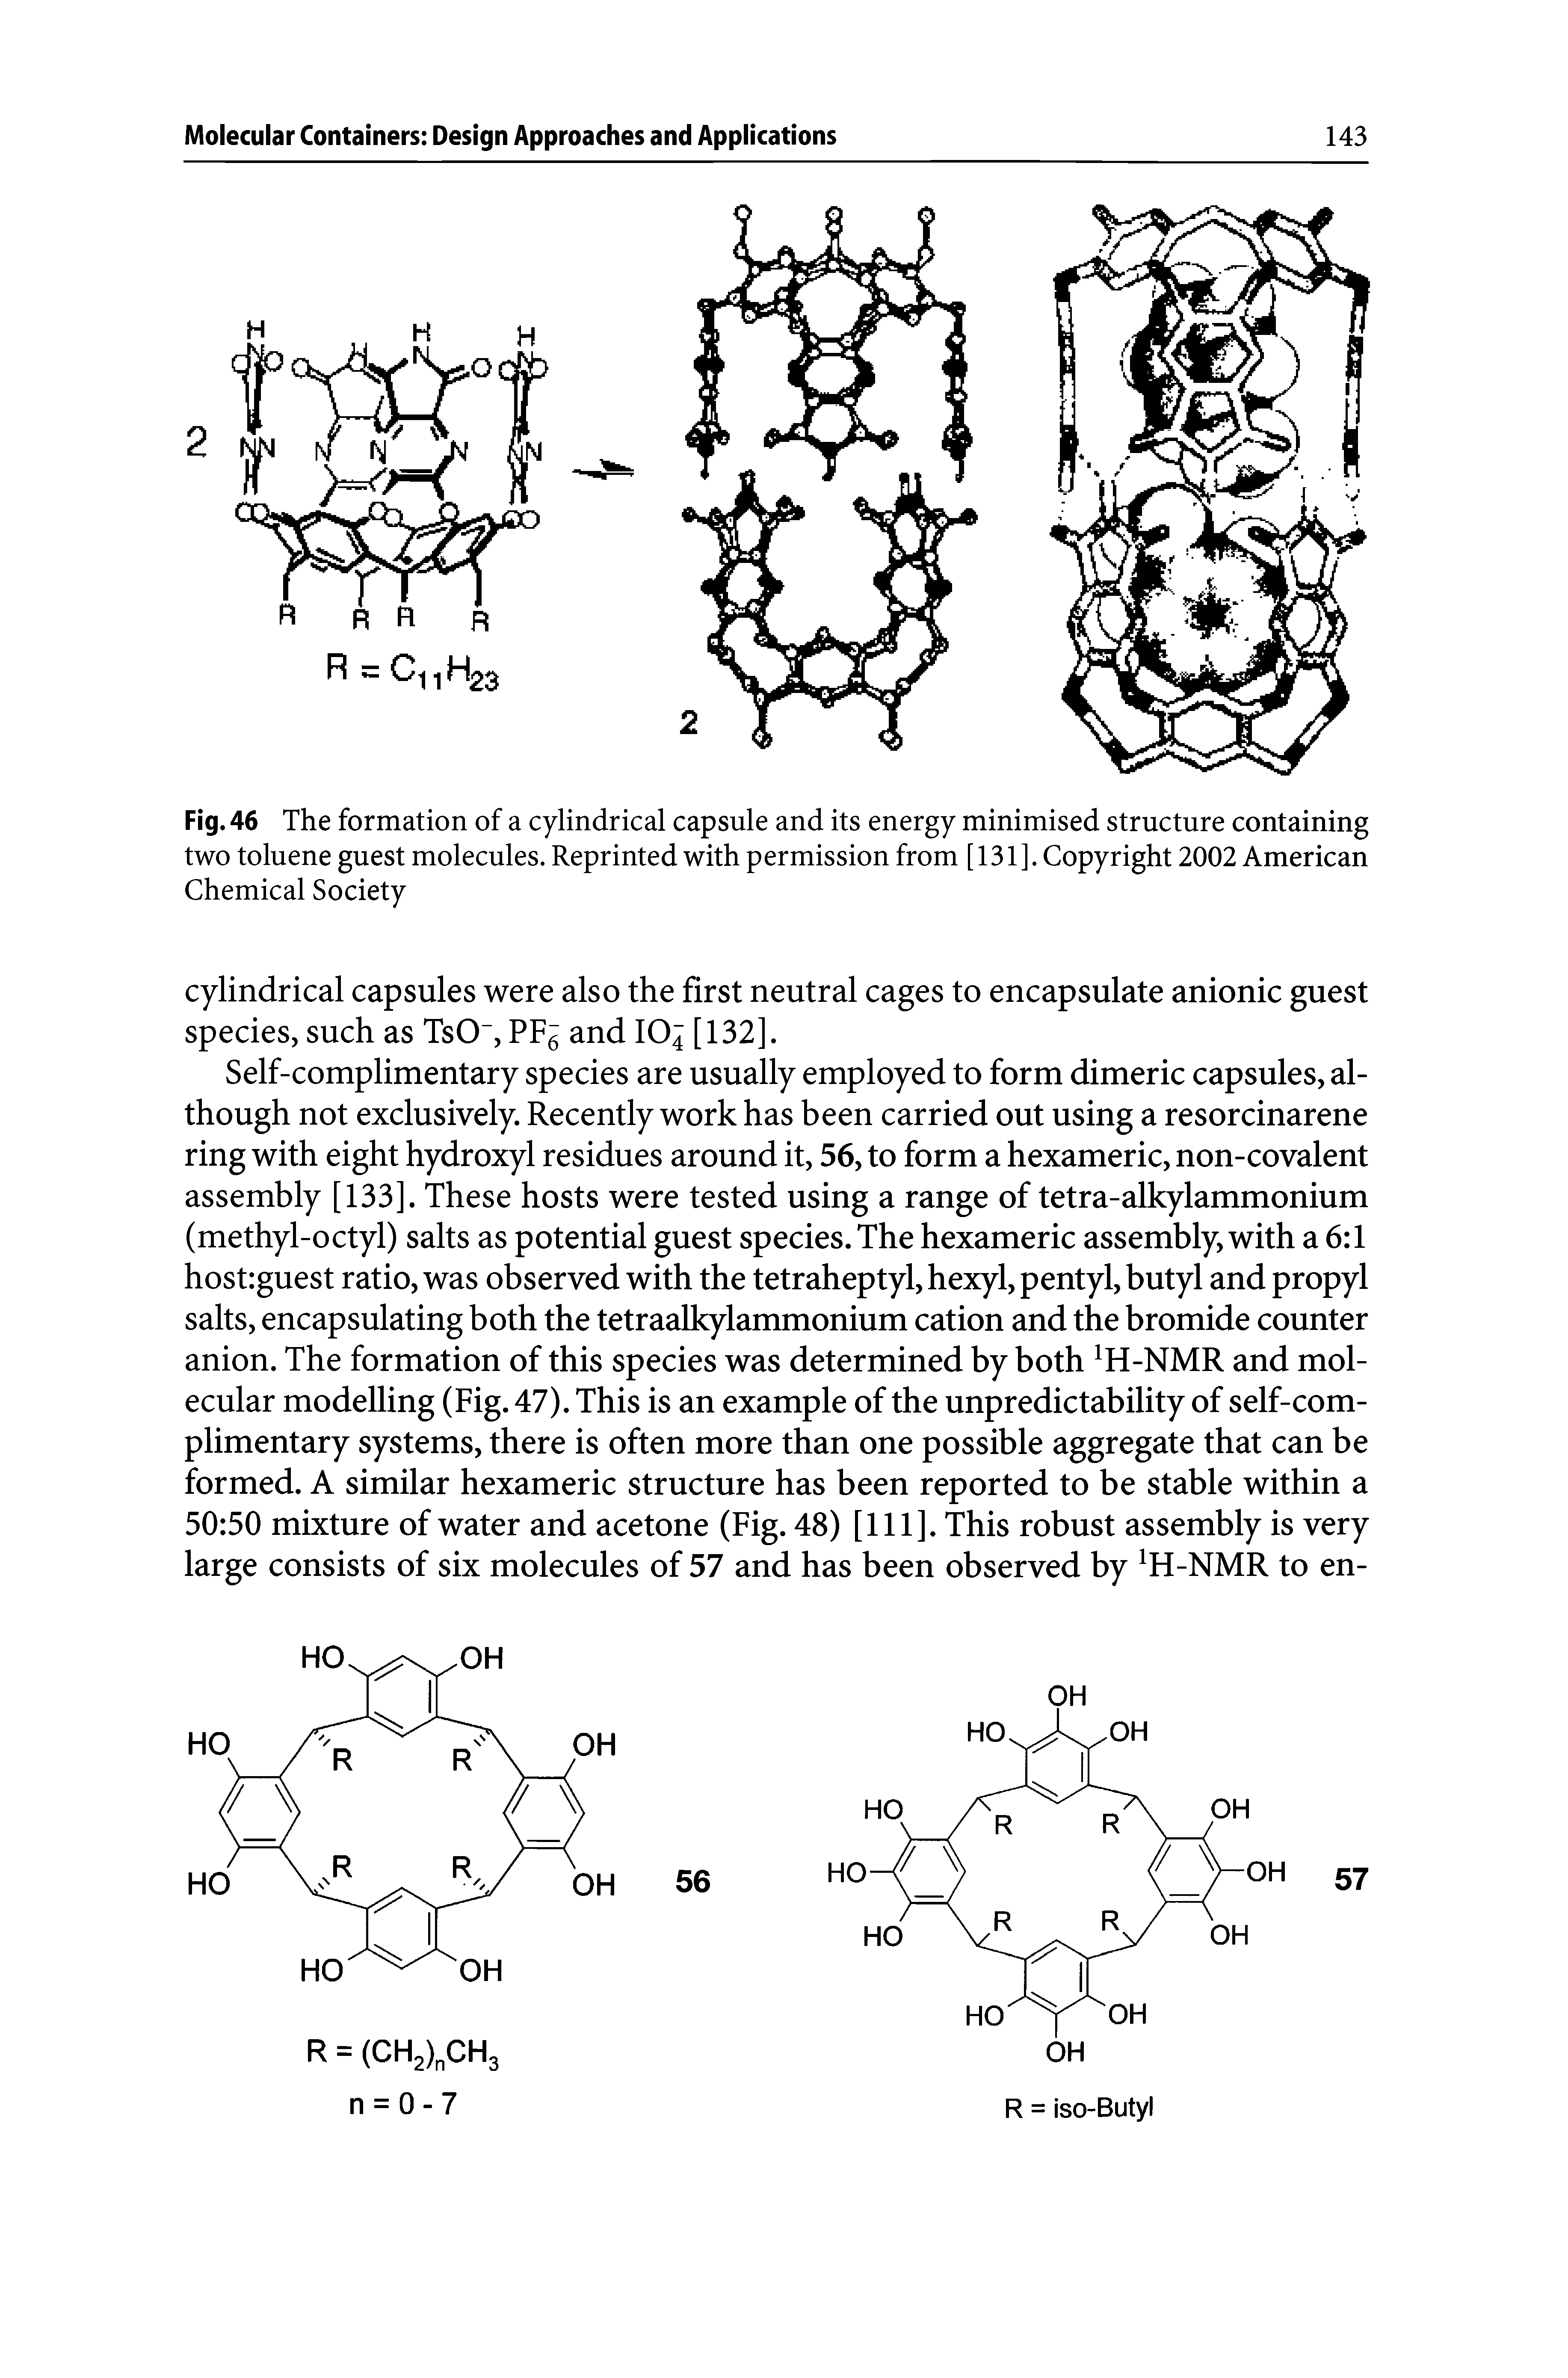 Fig. 46 The formation of a cylindrical capsule and its energy minimised structure containing two toluene guest molecules. Reprinted with permission from [131]. Copyright 2002 American Chemical Society...